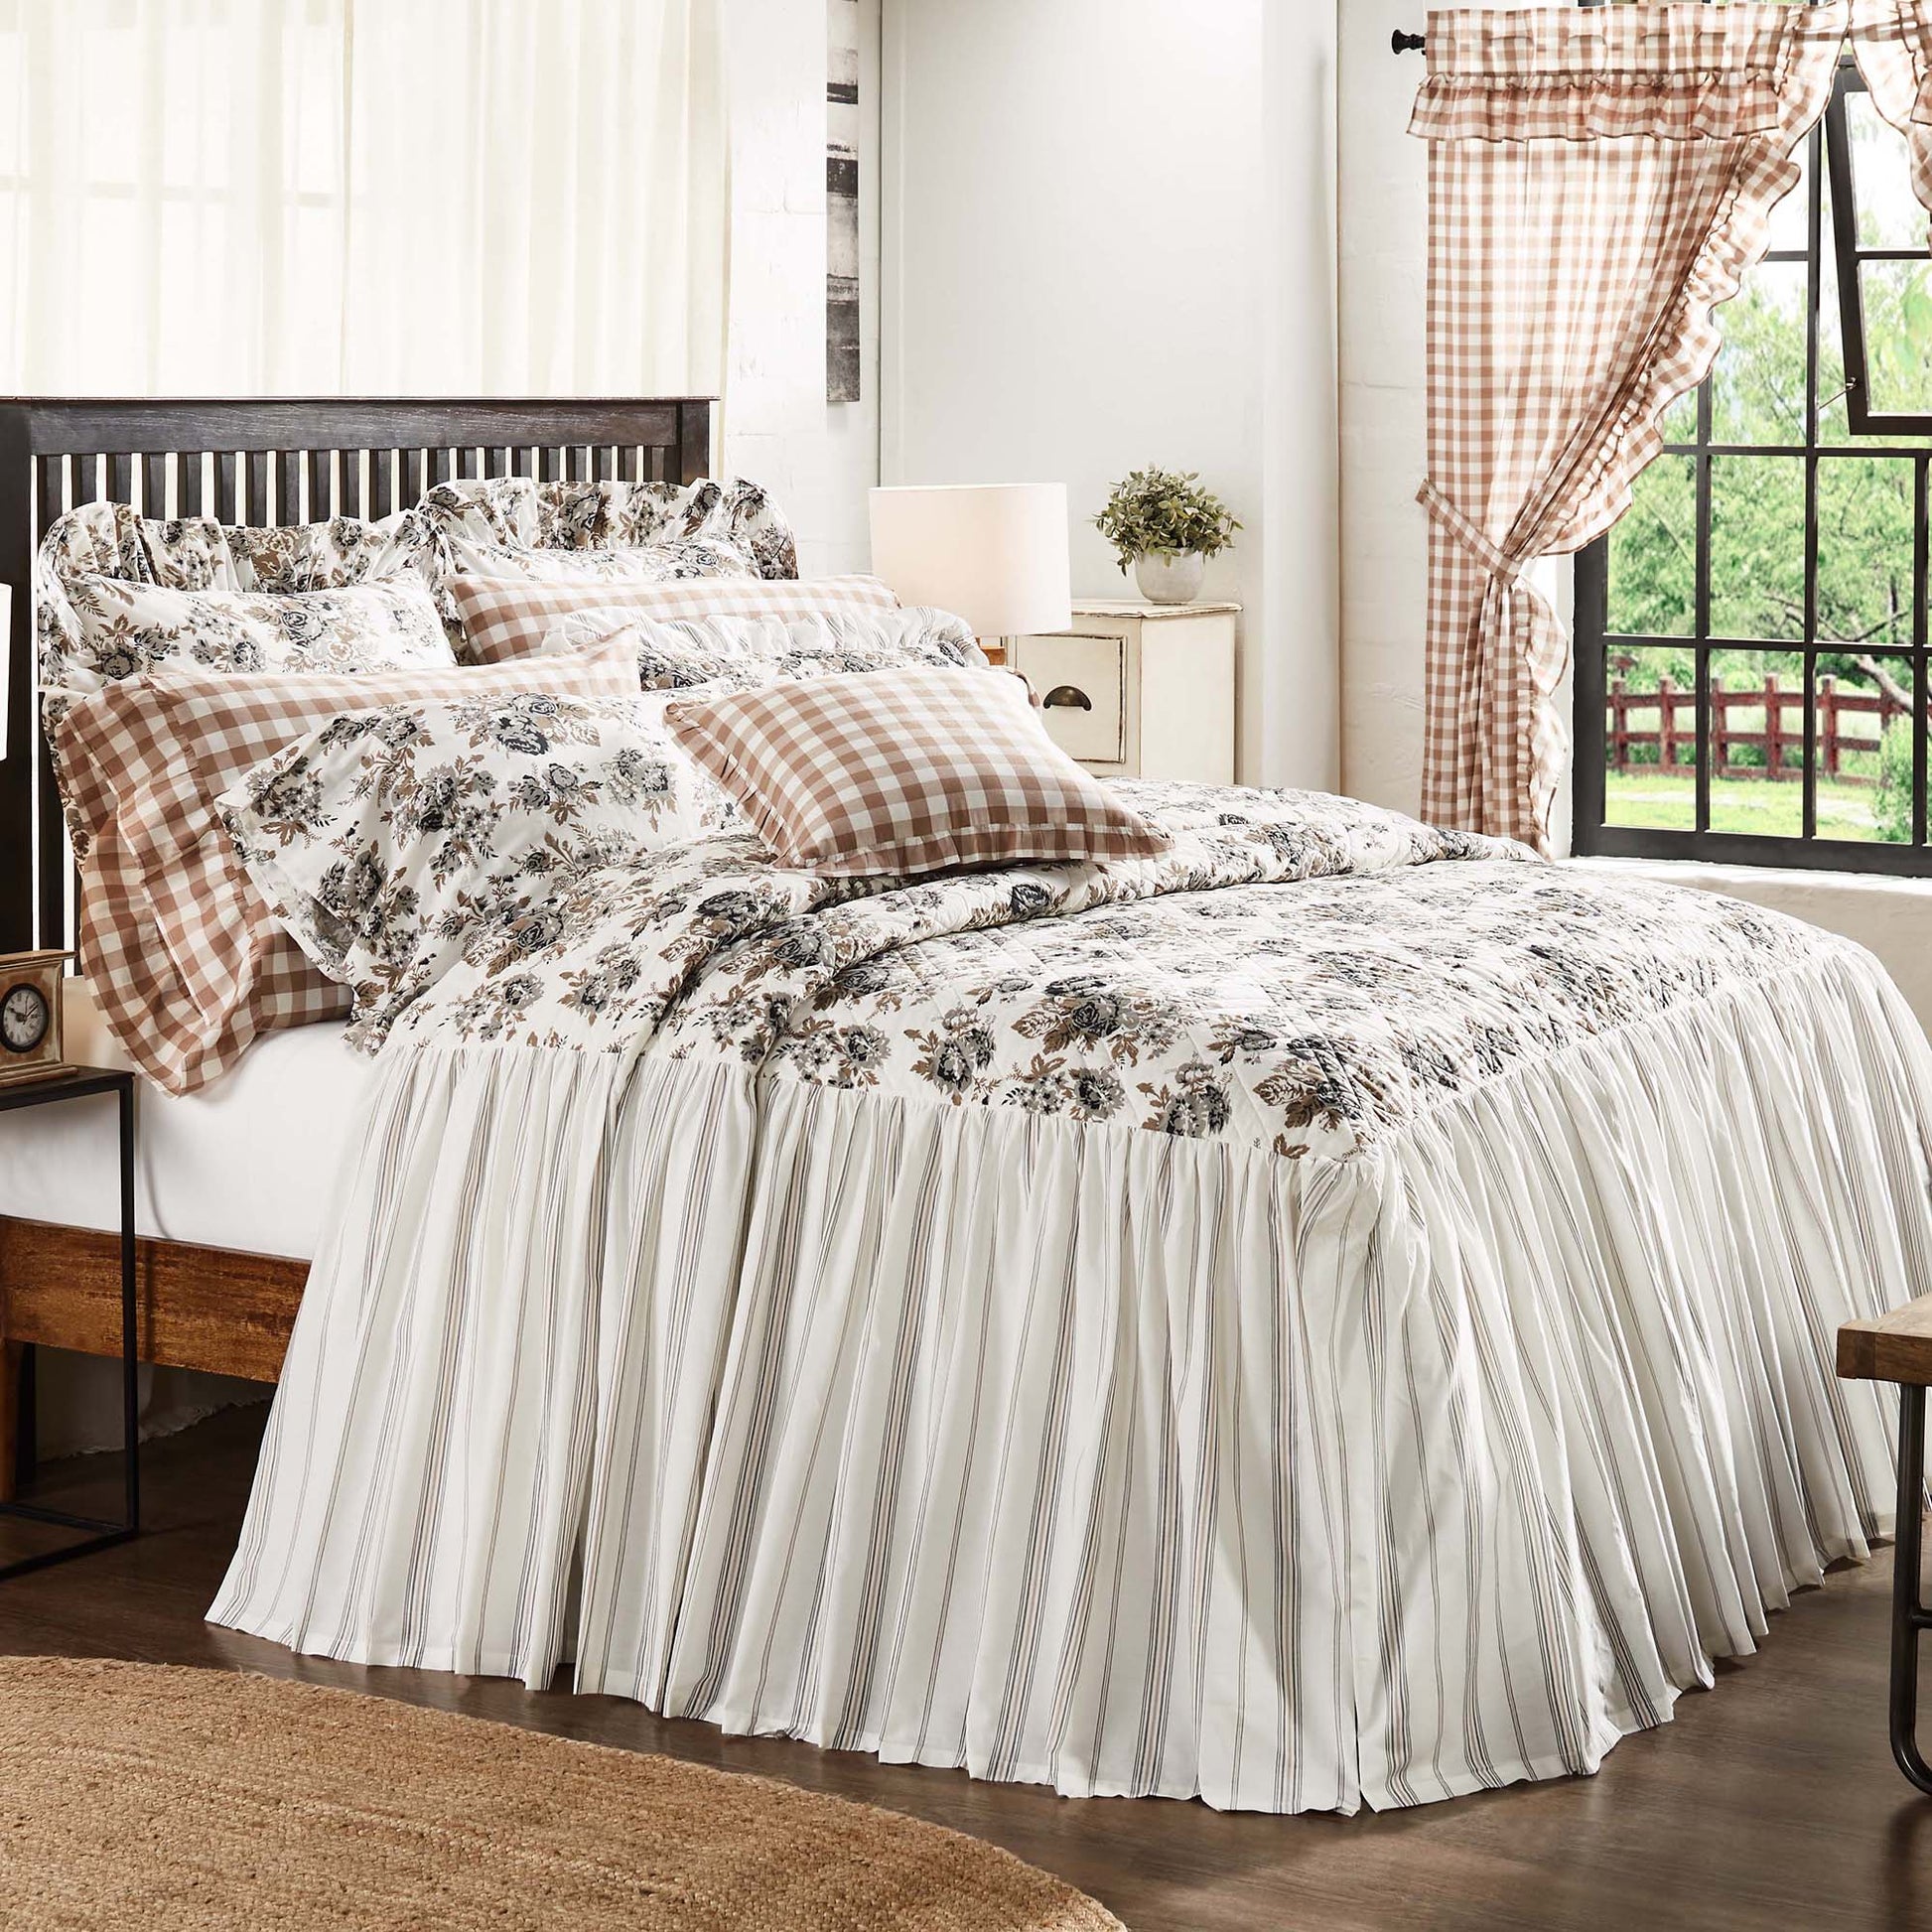 70012-Annie-Portabella-Floral-Ruffled-Queen-Coverlet-80x60-27-image-5